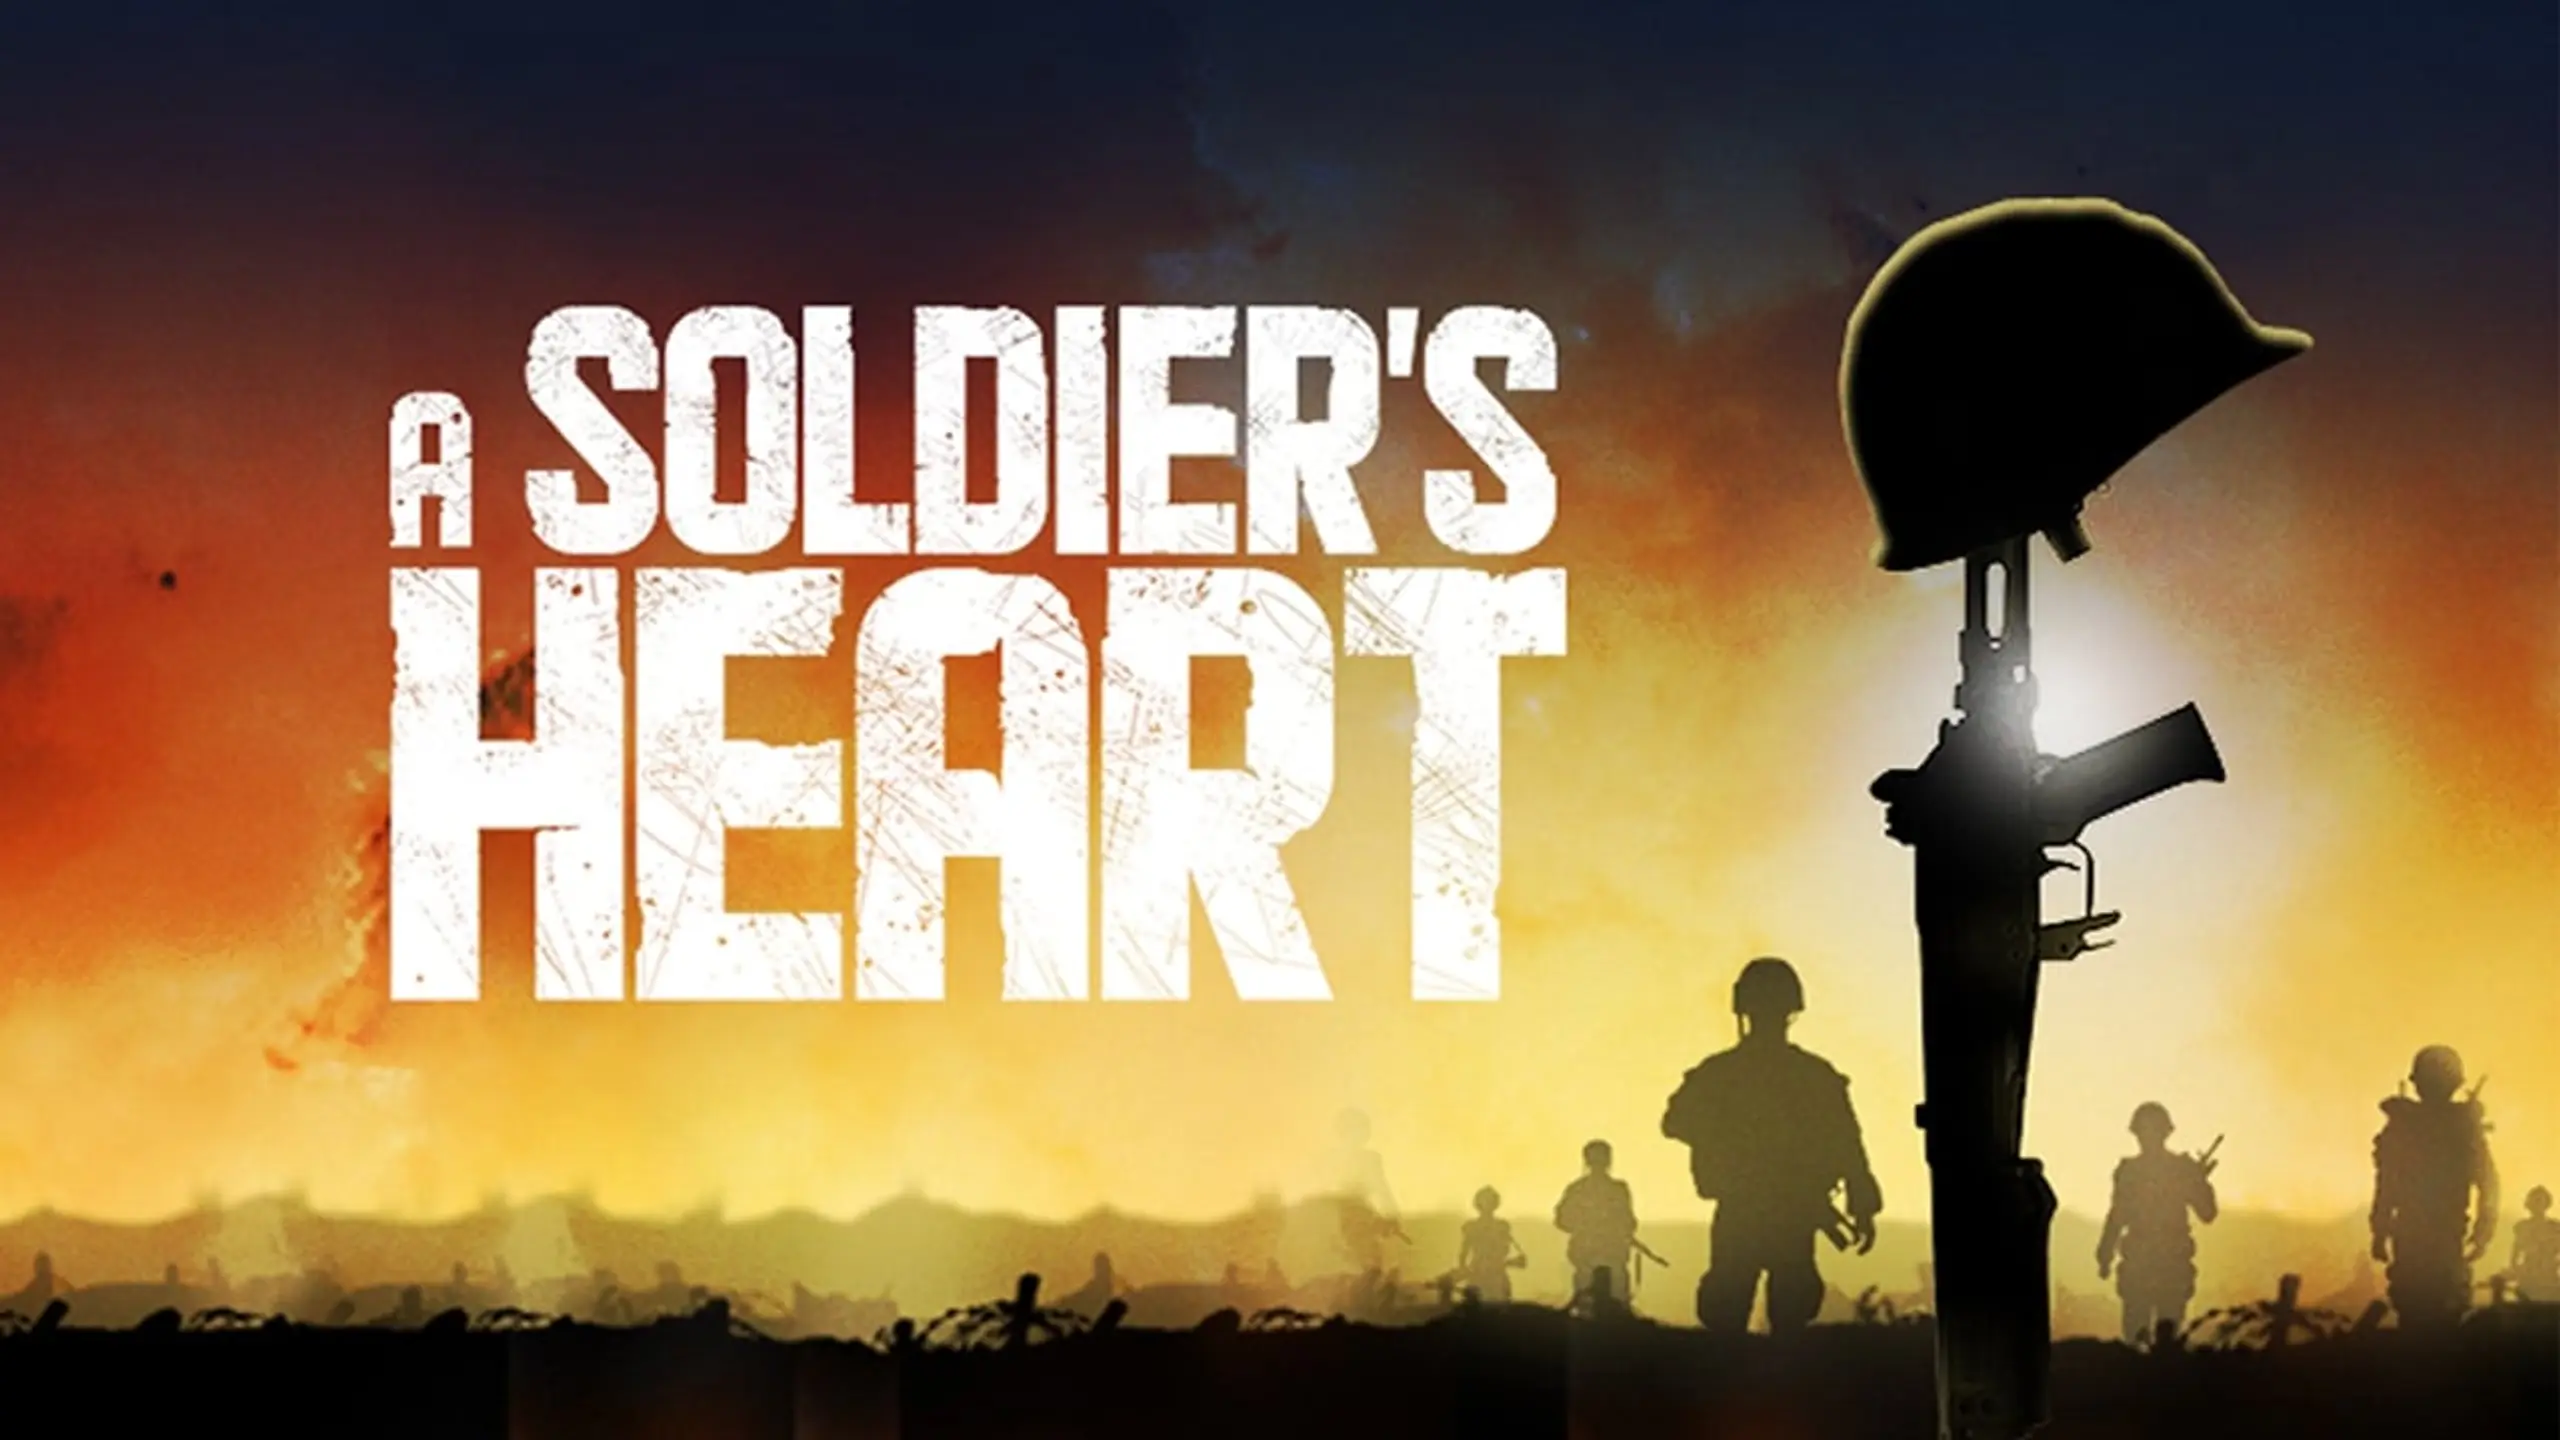 A Soldier's Heart